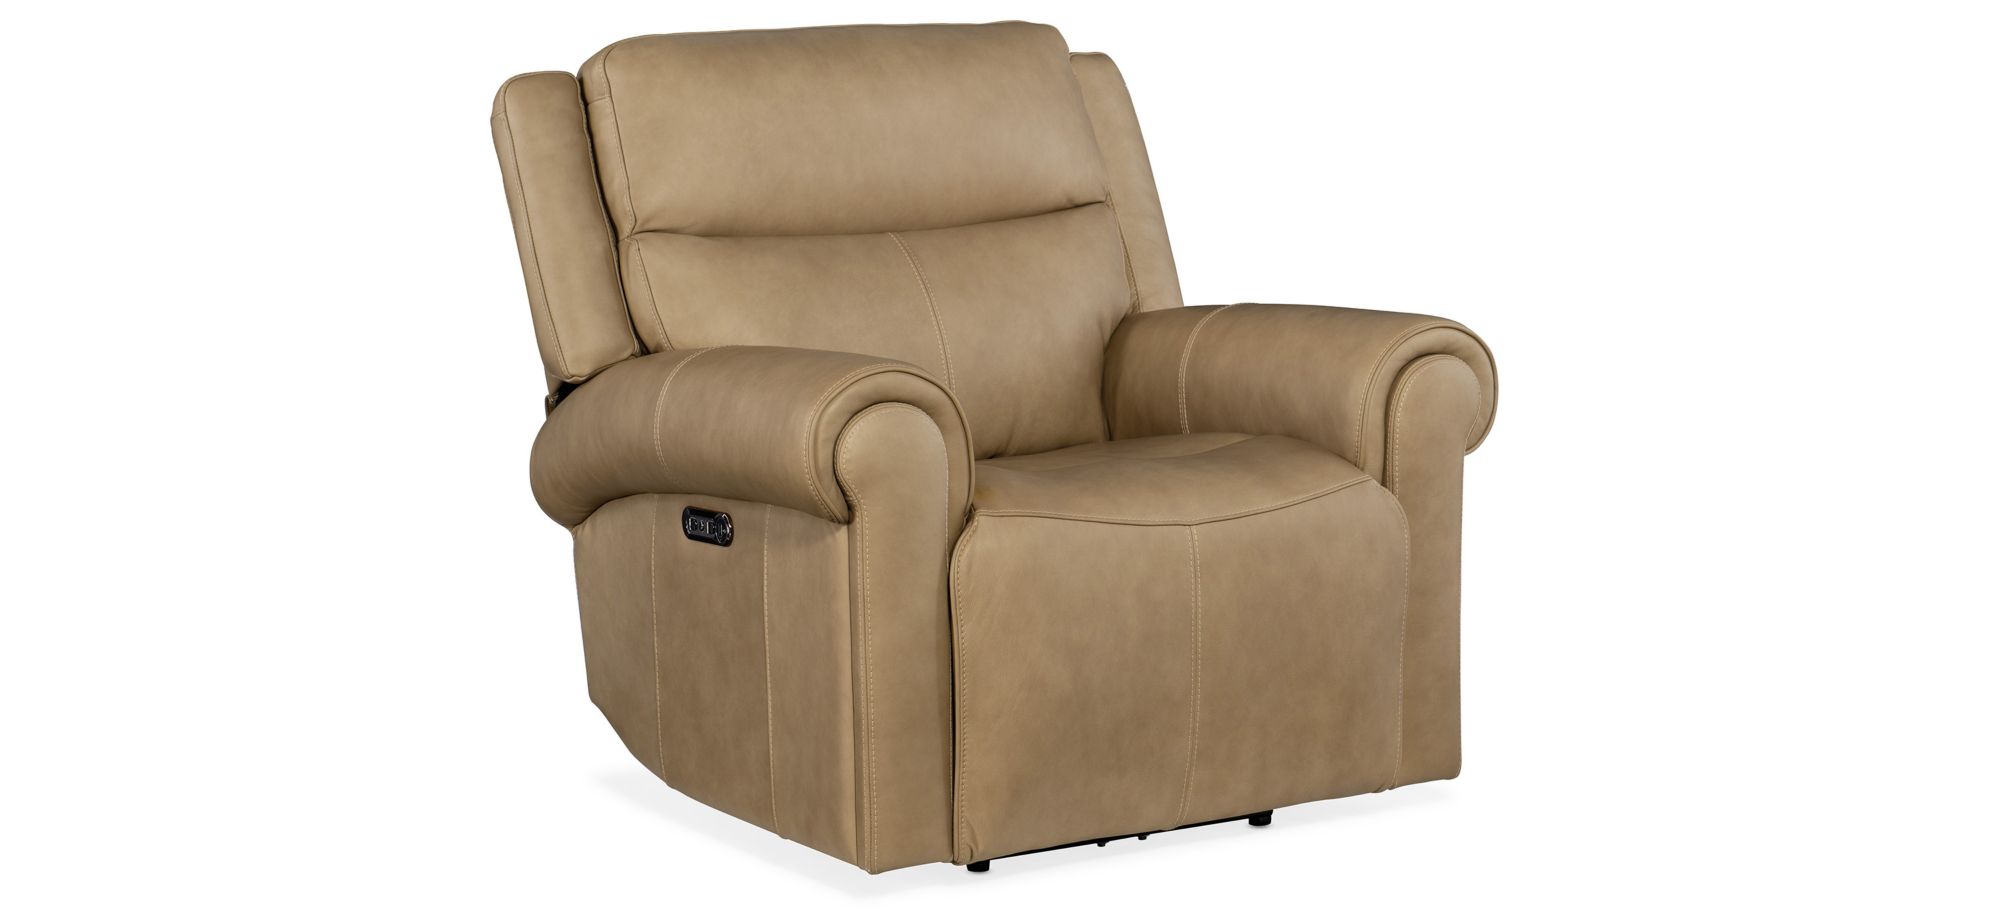 Oberon Zero Gravity Recliner in Caruso Sand by Hooker Furniture